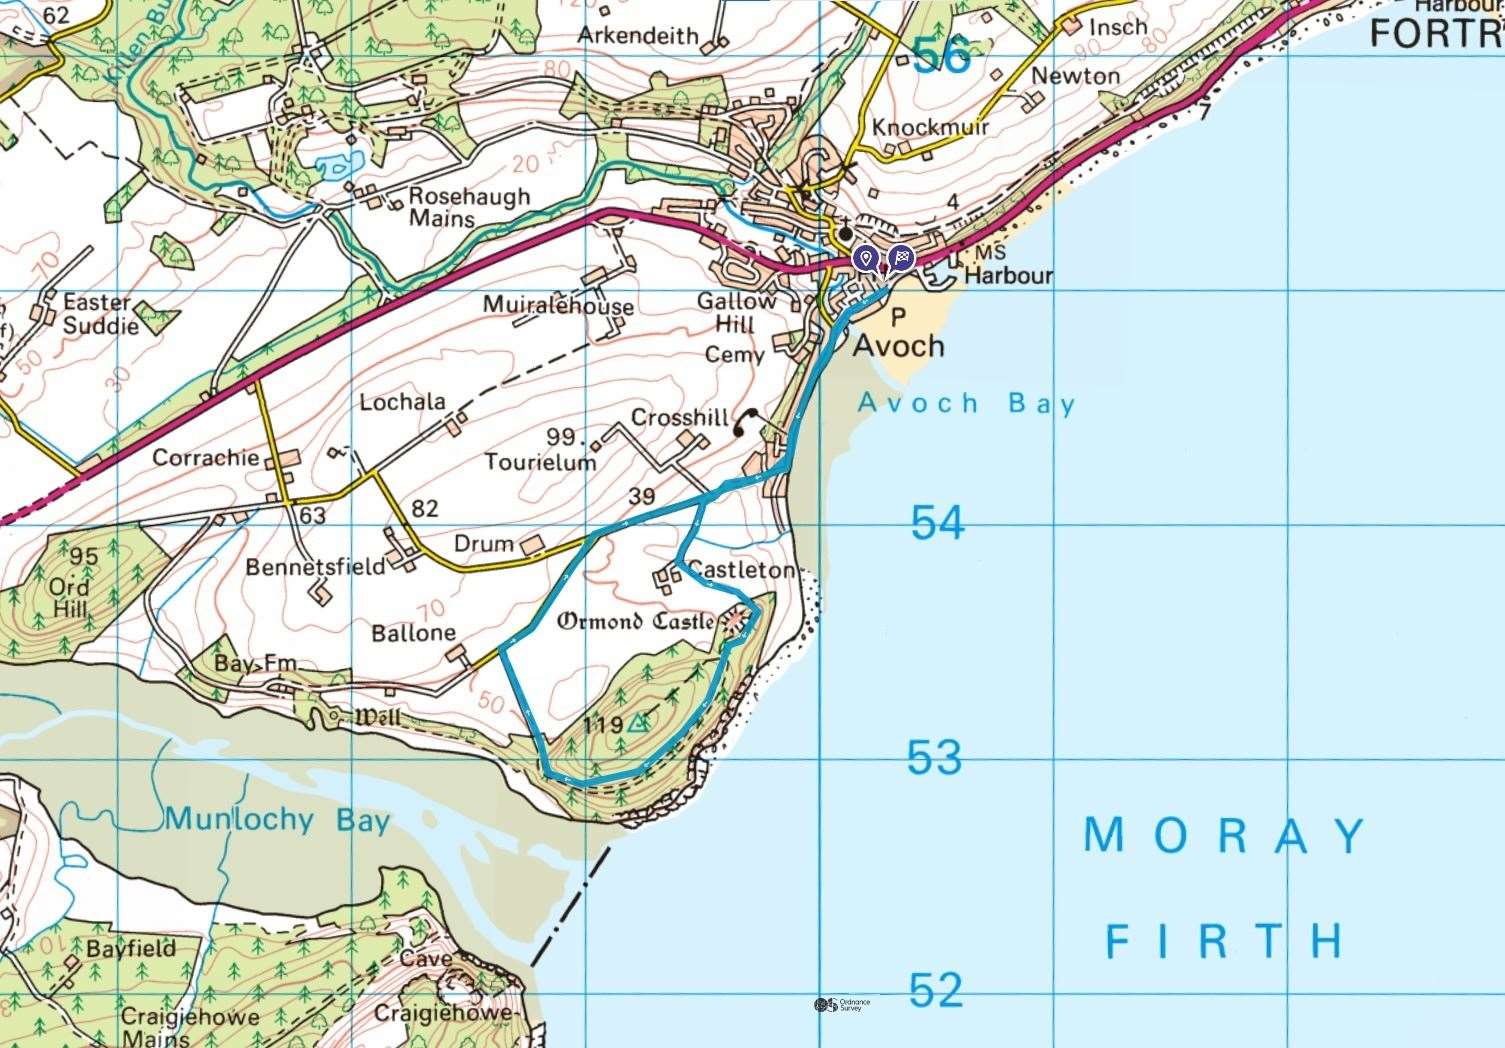 Avoch to Ormond Hill route. ©Crown copyright 2023 Ordnance Survey. Media 025/23.